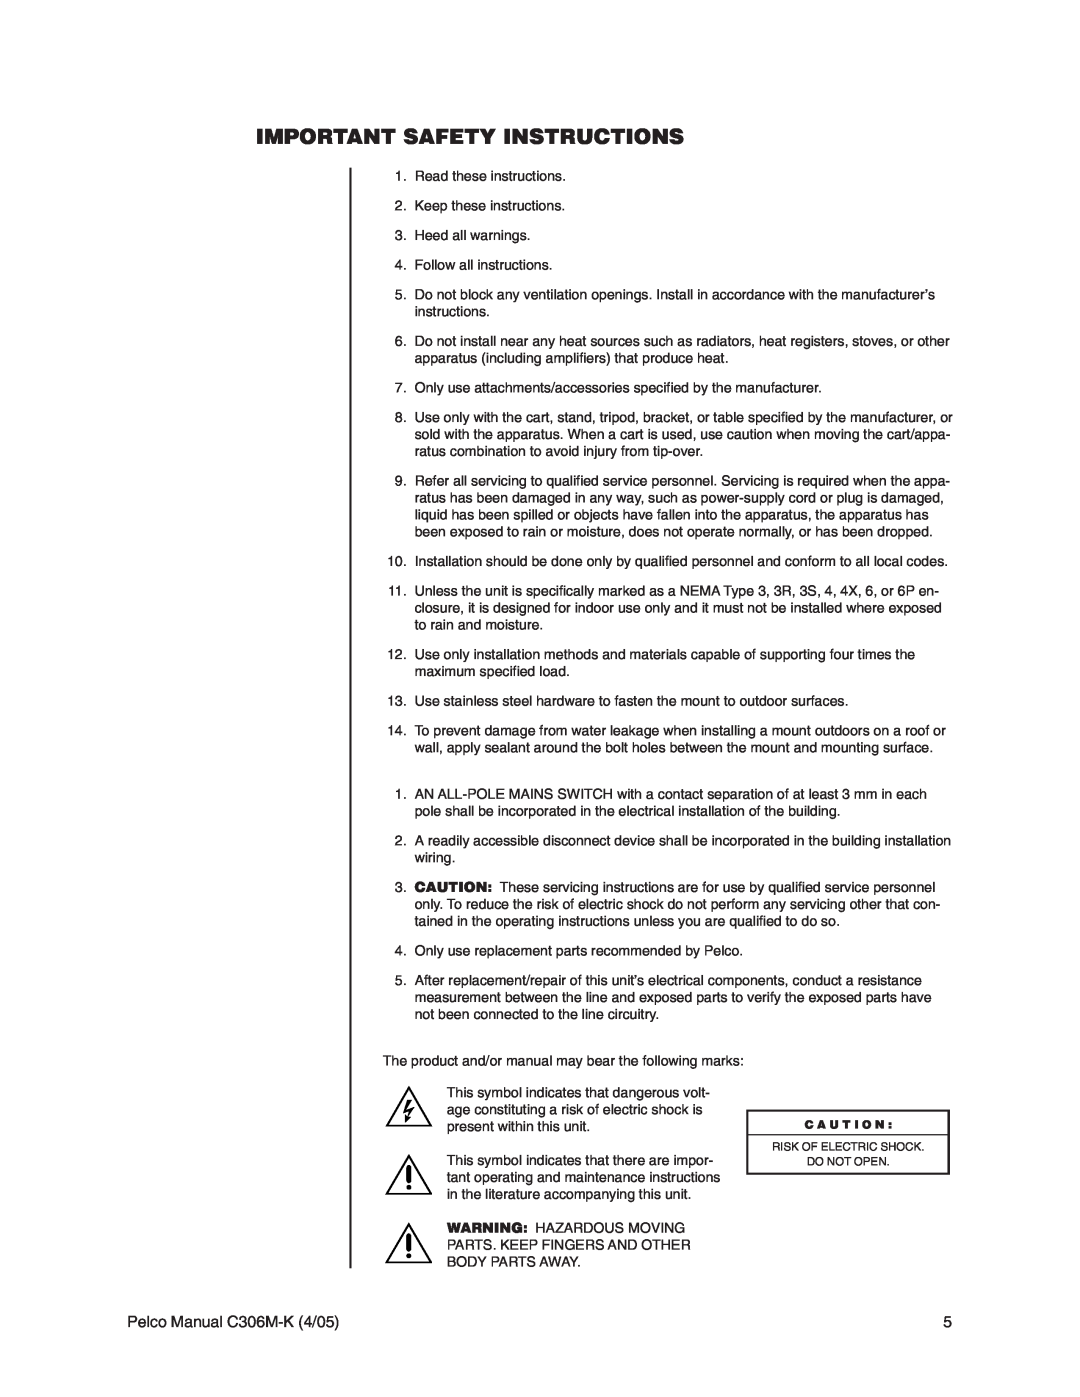 Pelco es3012 installation manual Important Safety Instructions, Pelco Manual C306M-K4/05 